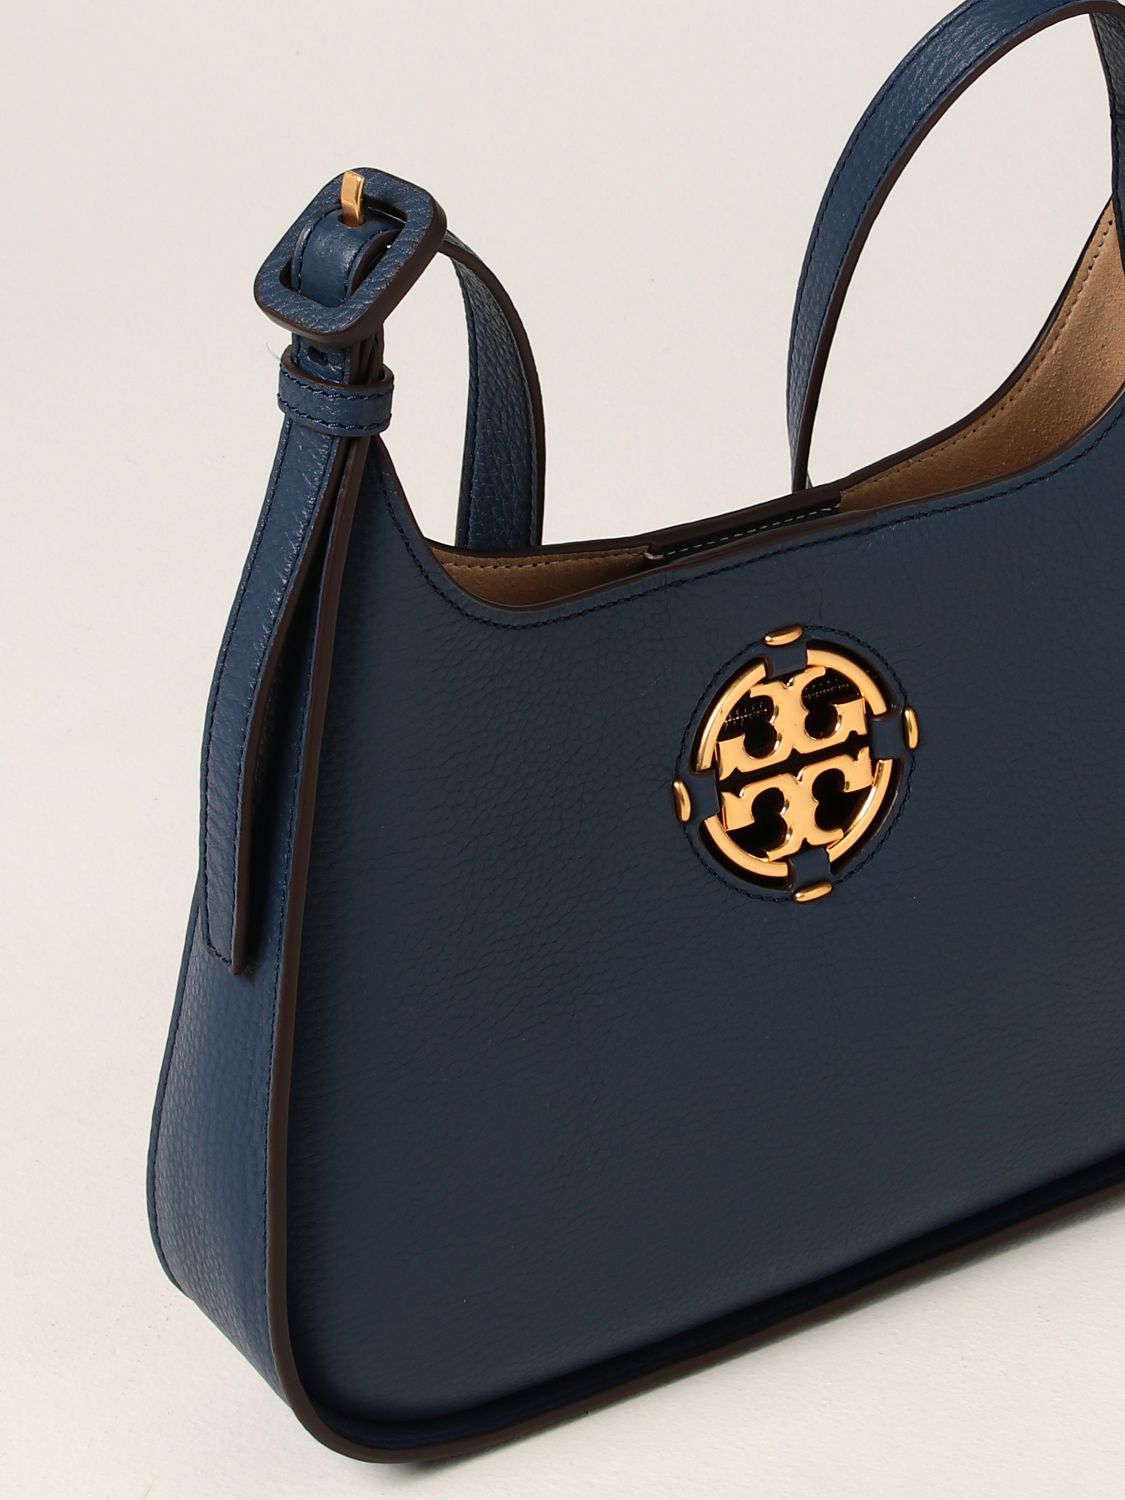 TORY BURCH: Miller bag in grained leather with logo - Brown | Tory Burch  crossbody bags 82982 online at